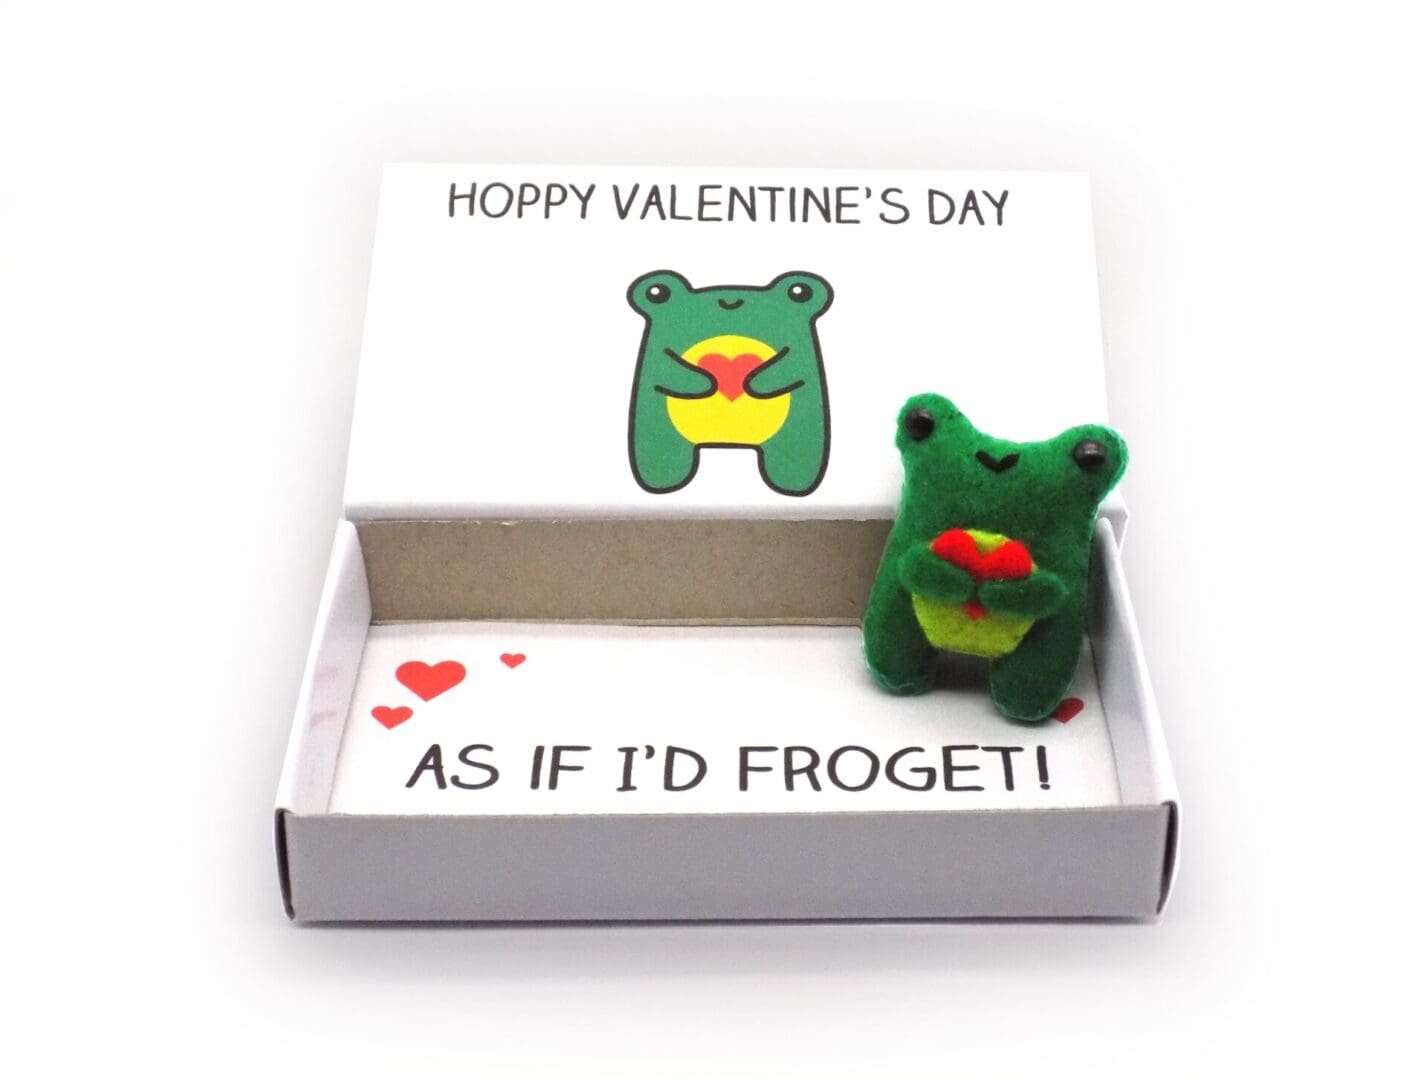 Valentine's Day gift - Frog magnet in a matchbox